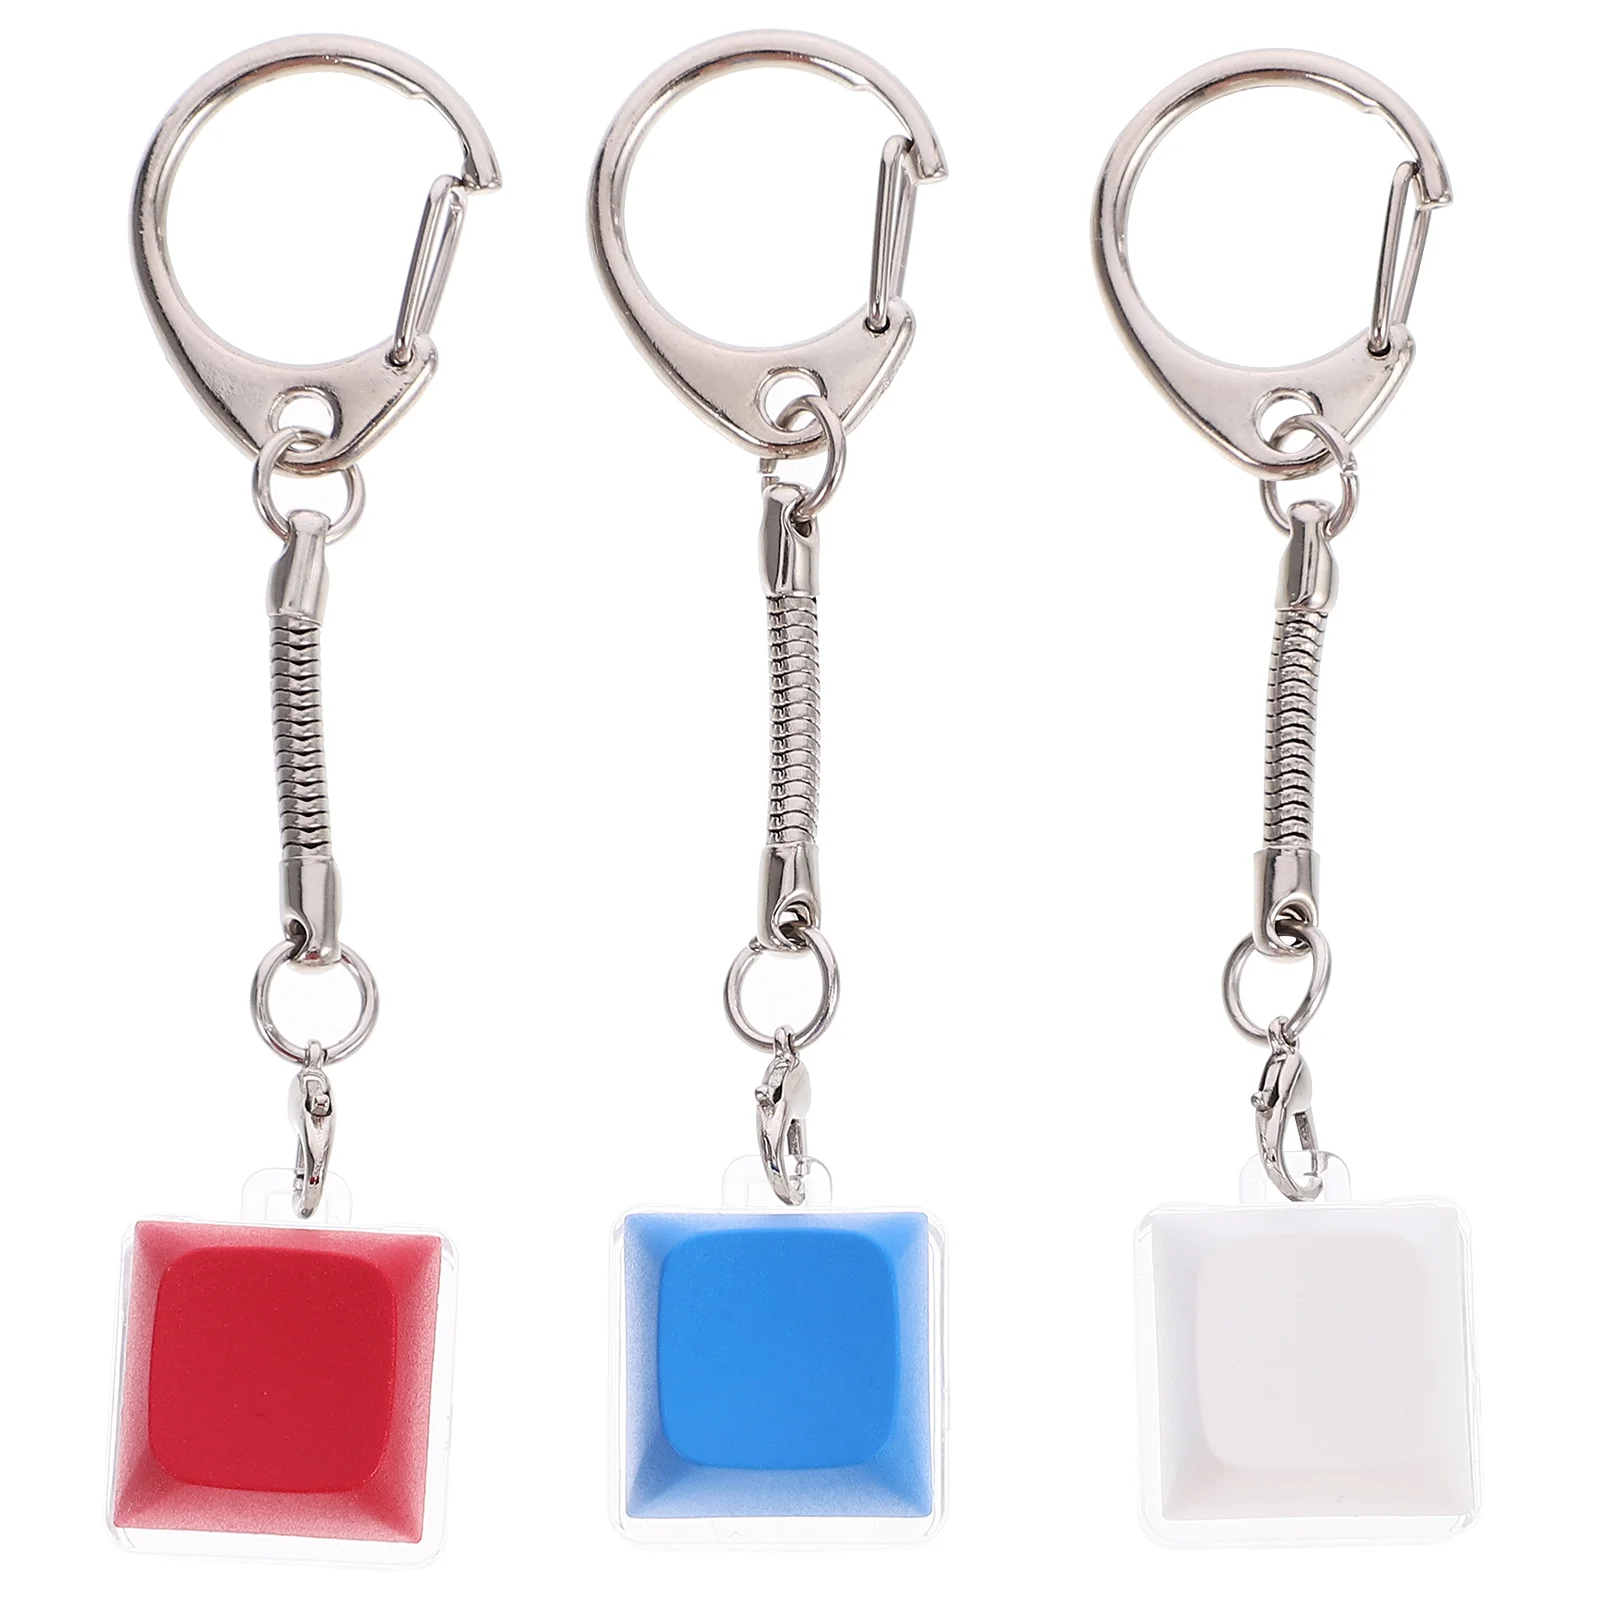 

3 Pcs Keyboard Toys Purse Hanging Charms Backpack Keychain Keychains Fob Bag Pendants Unique Decor Bags